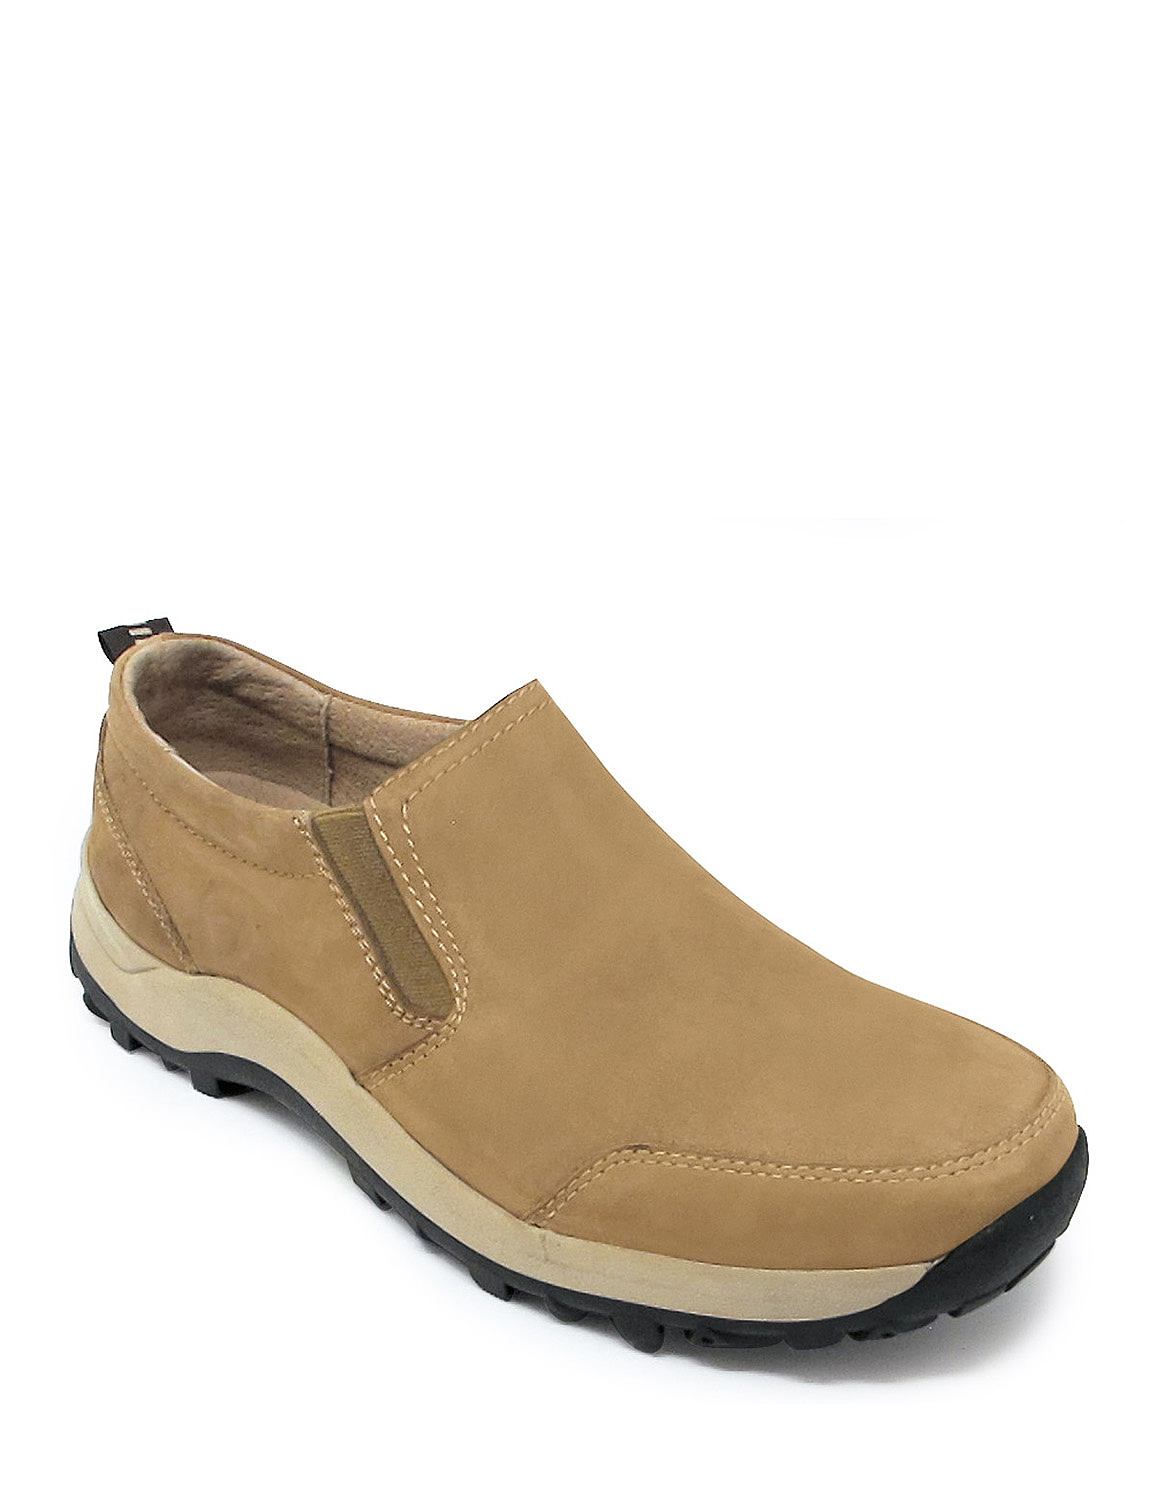 Cotswold Leather Slip On Walking Shoe | Chums